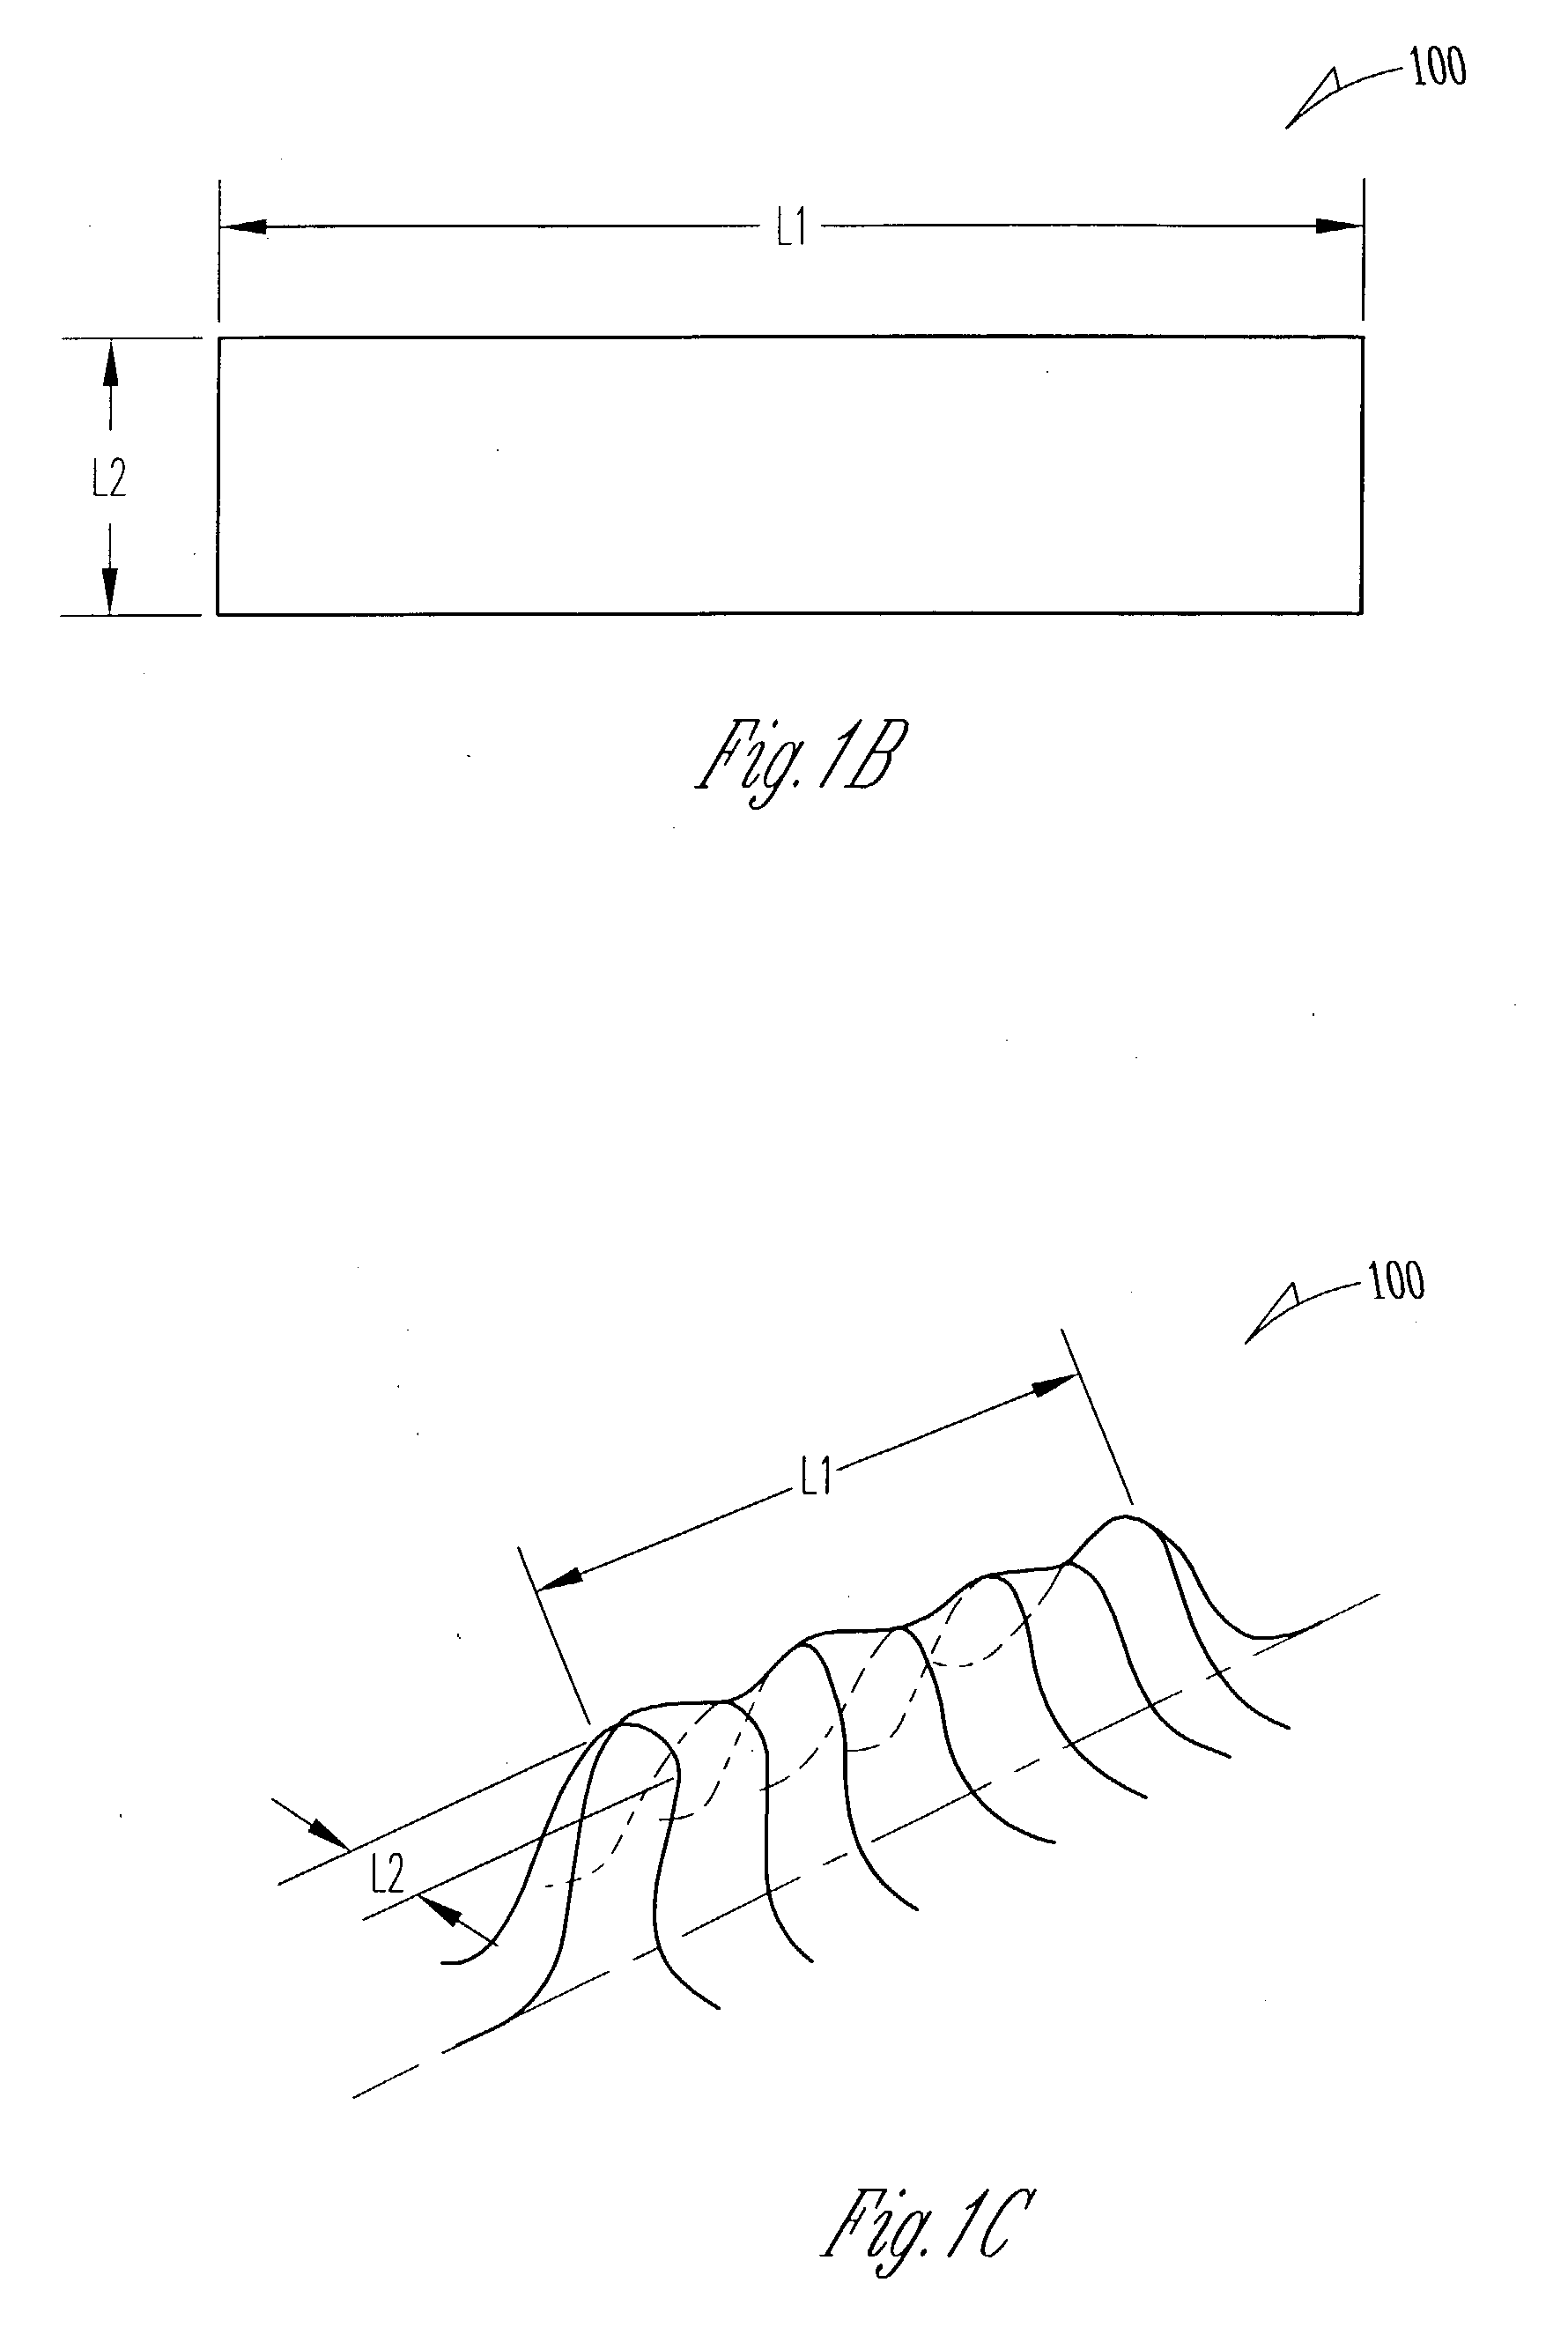 Laser scanning apparatus and methods for thermal processing